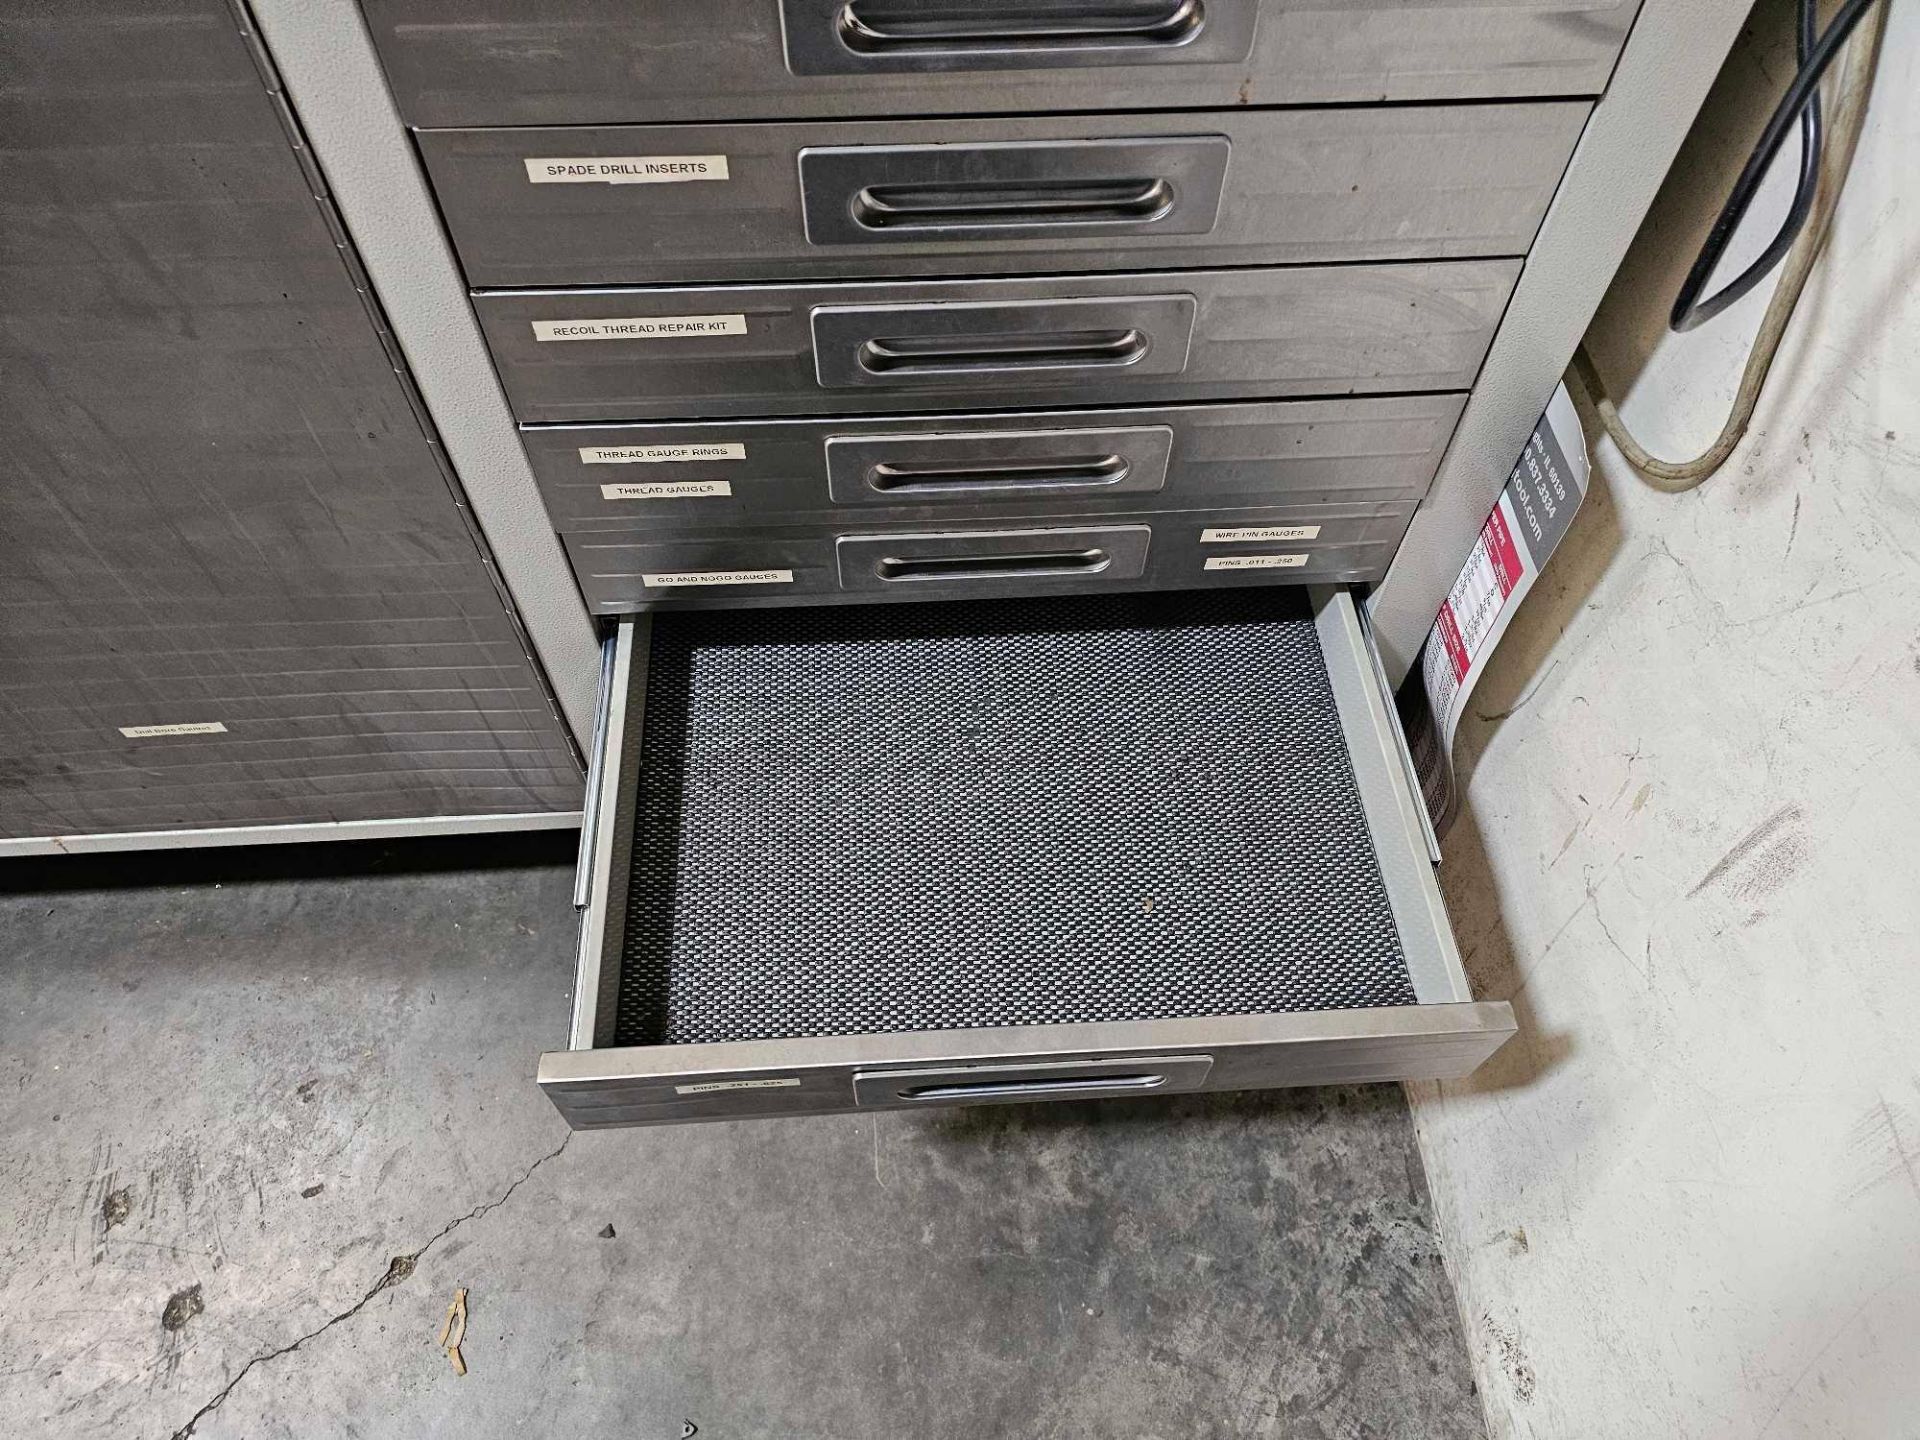 12 DRAWER ROLLING CABINET - Image 12 of 14